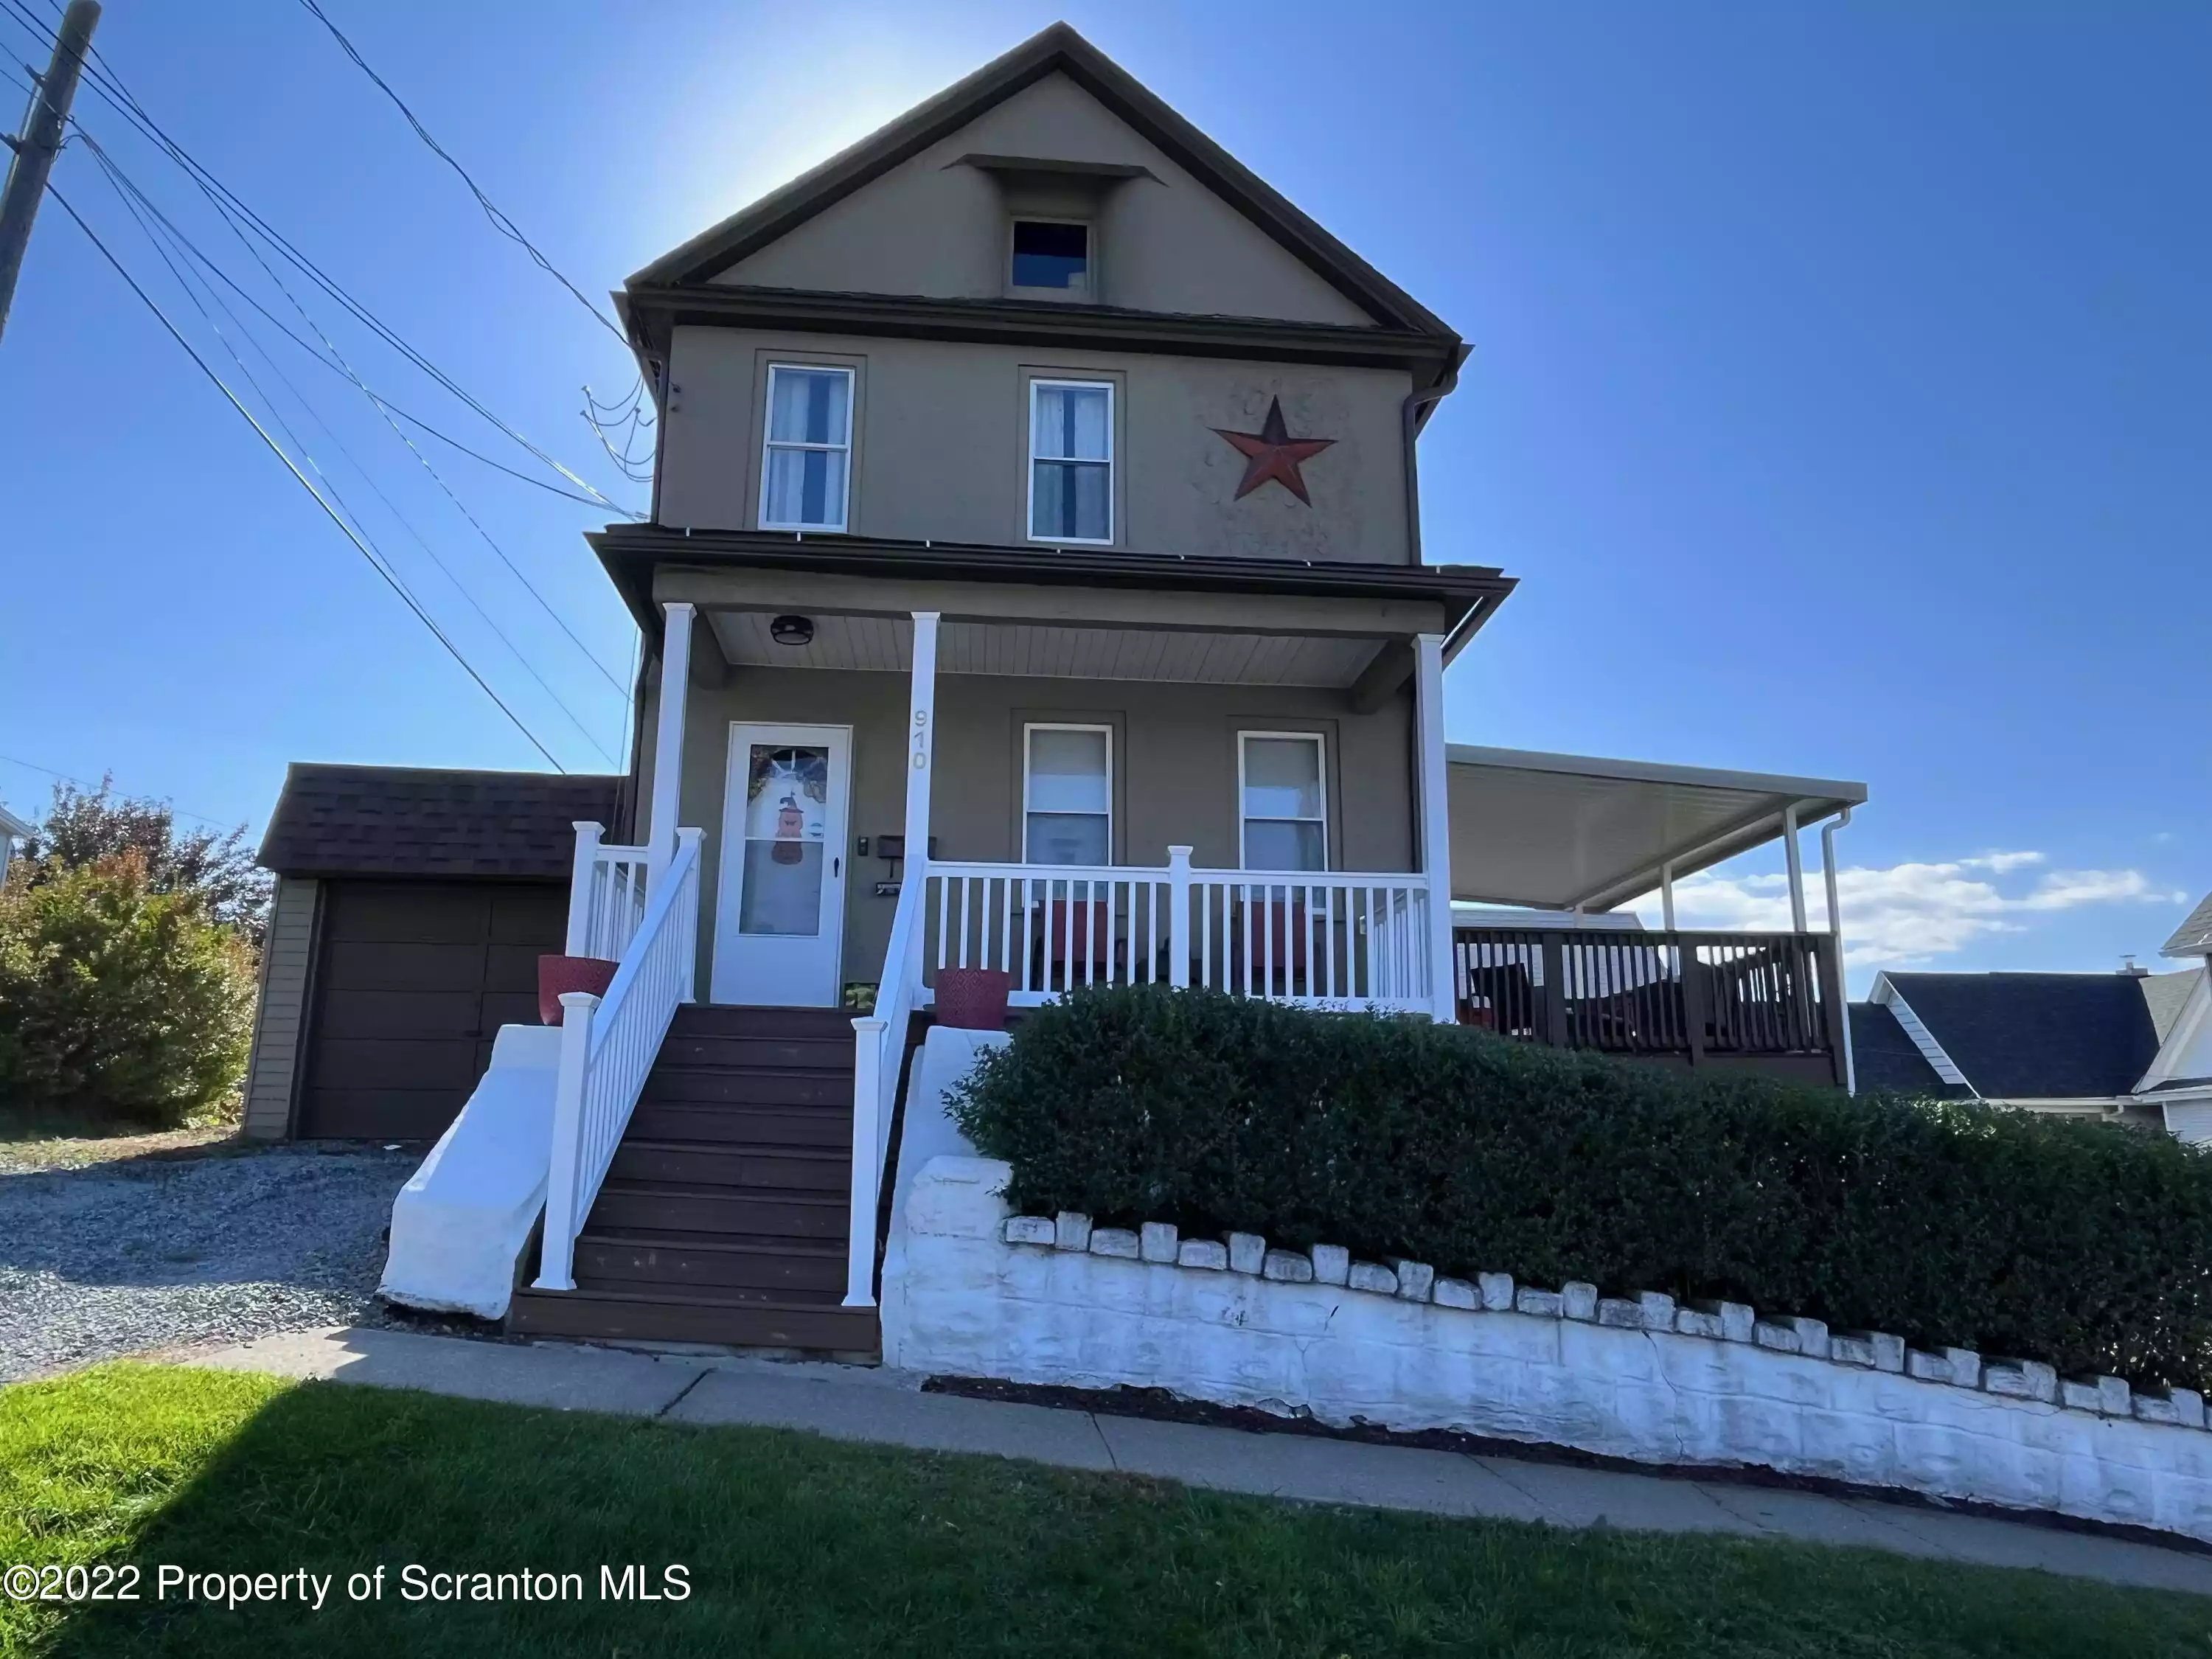 910 Orchard Street, Scranton, Pennsylvania 18505, 4 Rooms Rooms,2 BathroomsBathrooms,Residential,For Sale,Orchard,GSB224560